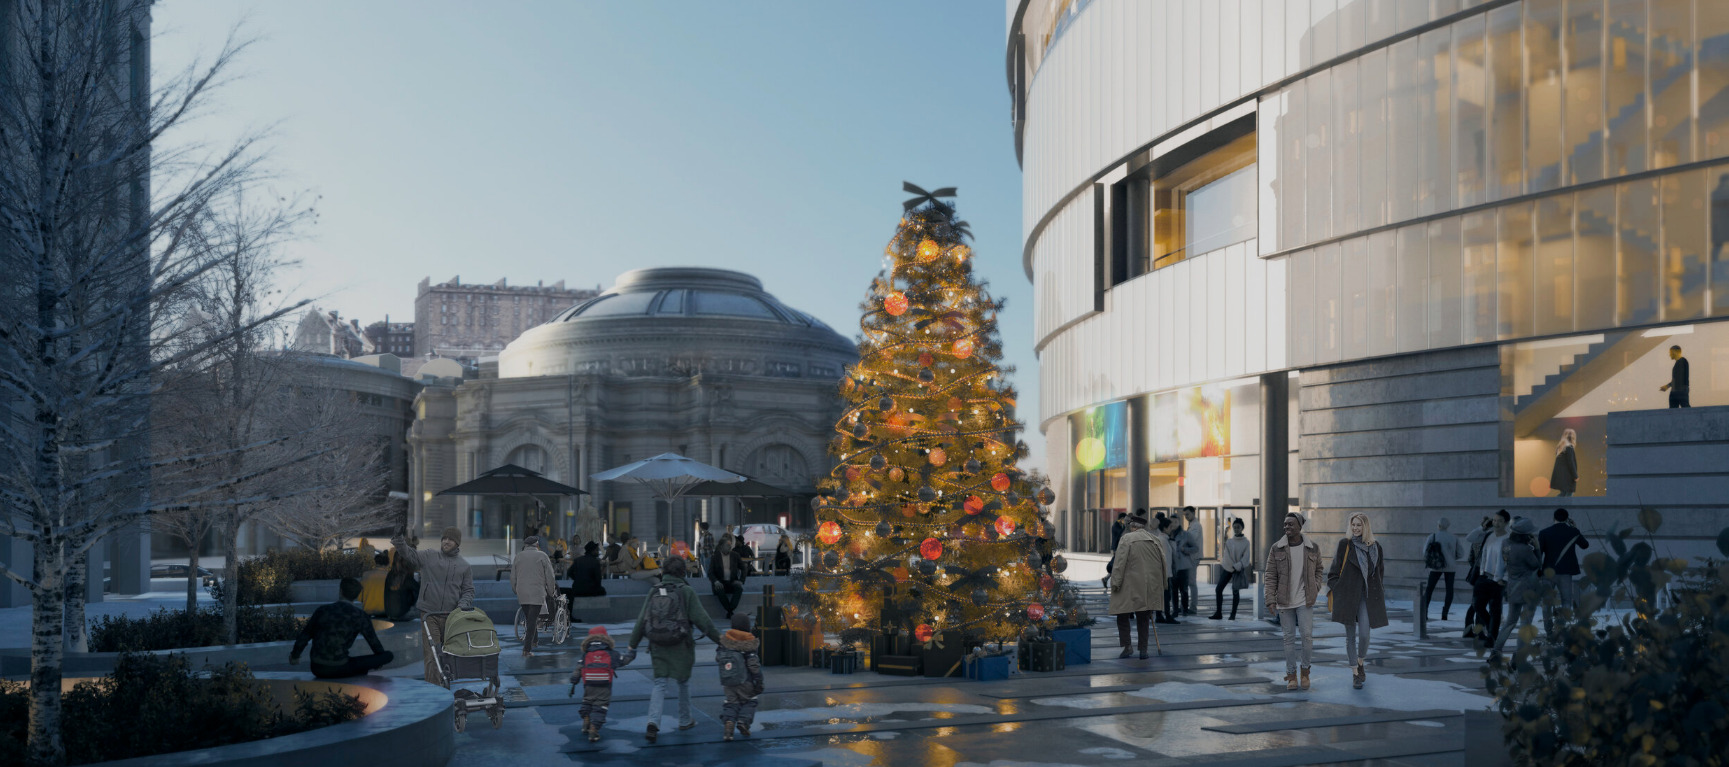 Scaled-back cinema plans submitted for Edinburgh's Festival Square